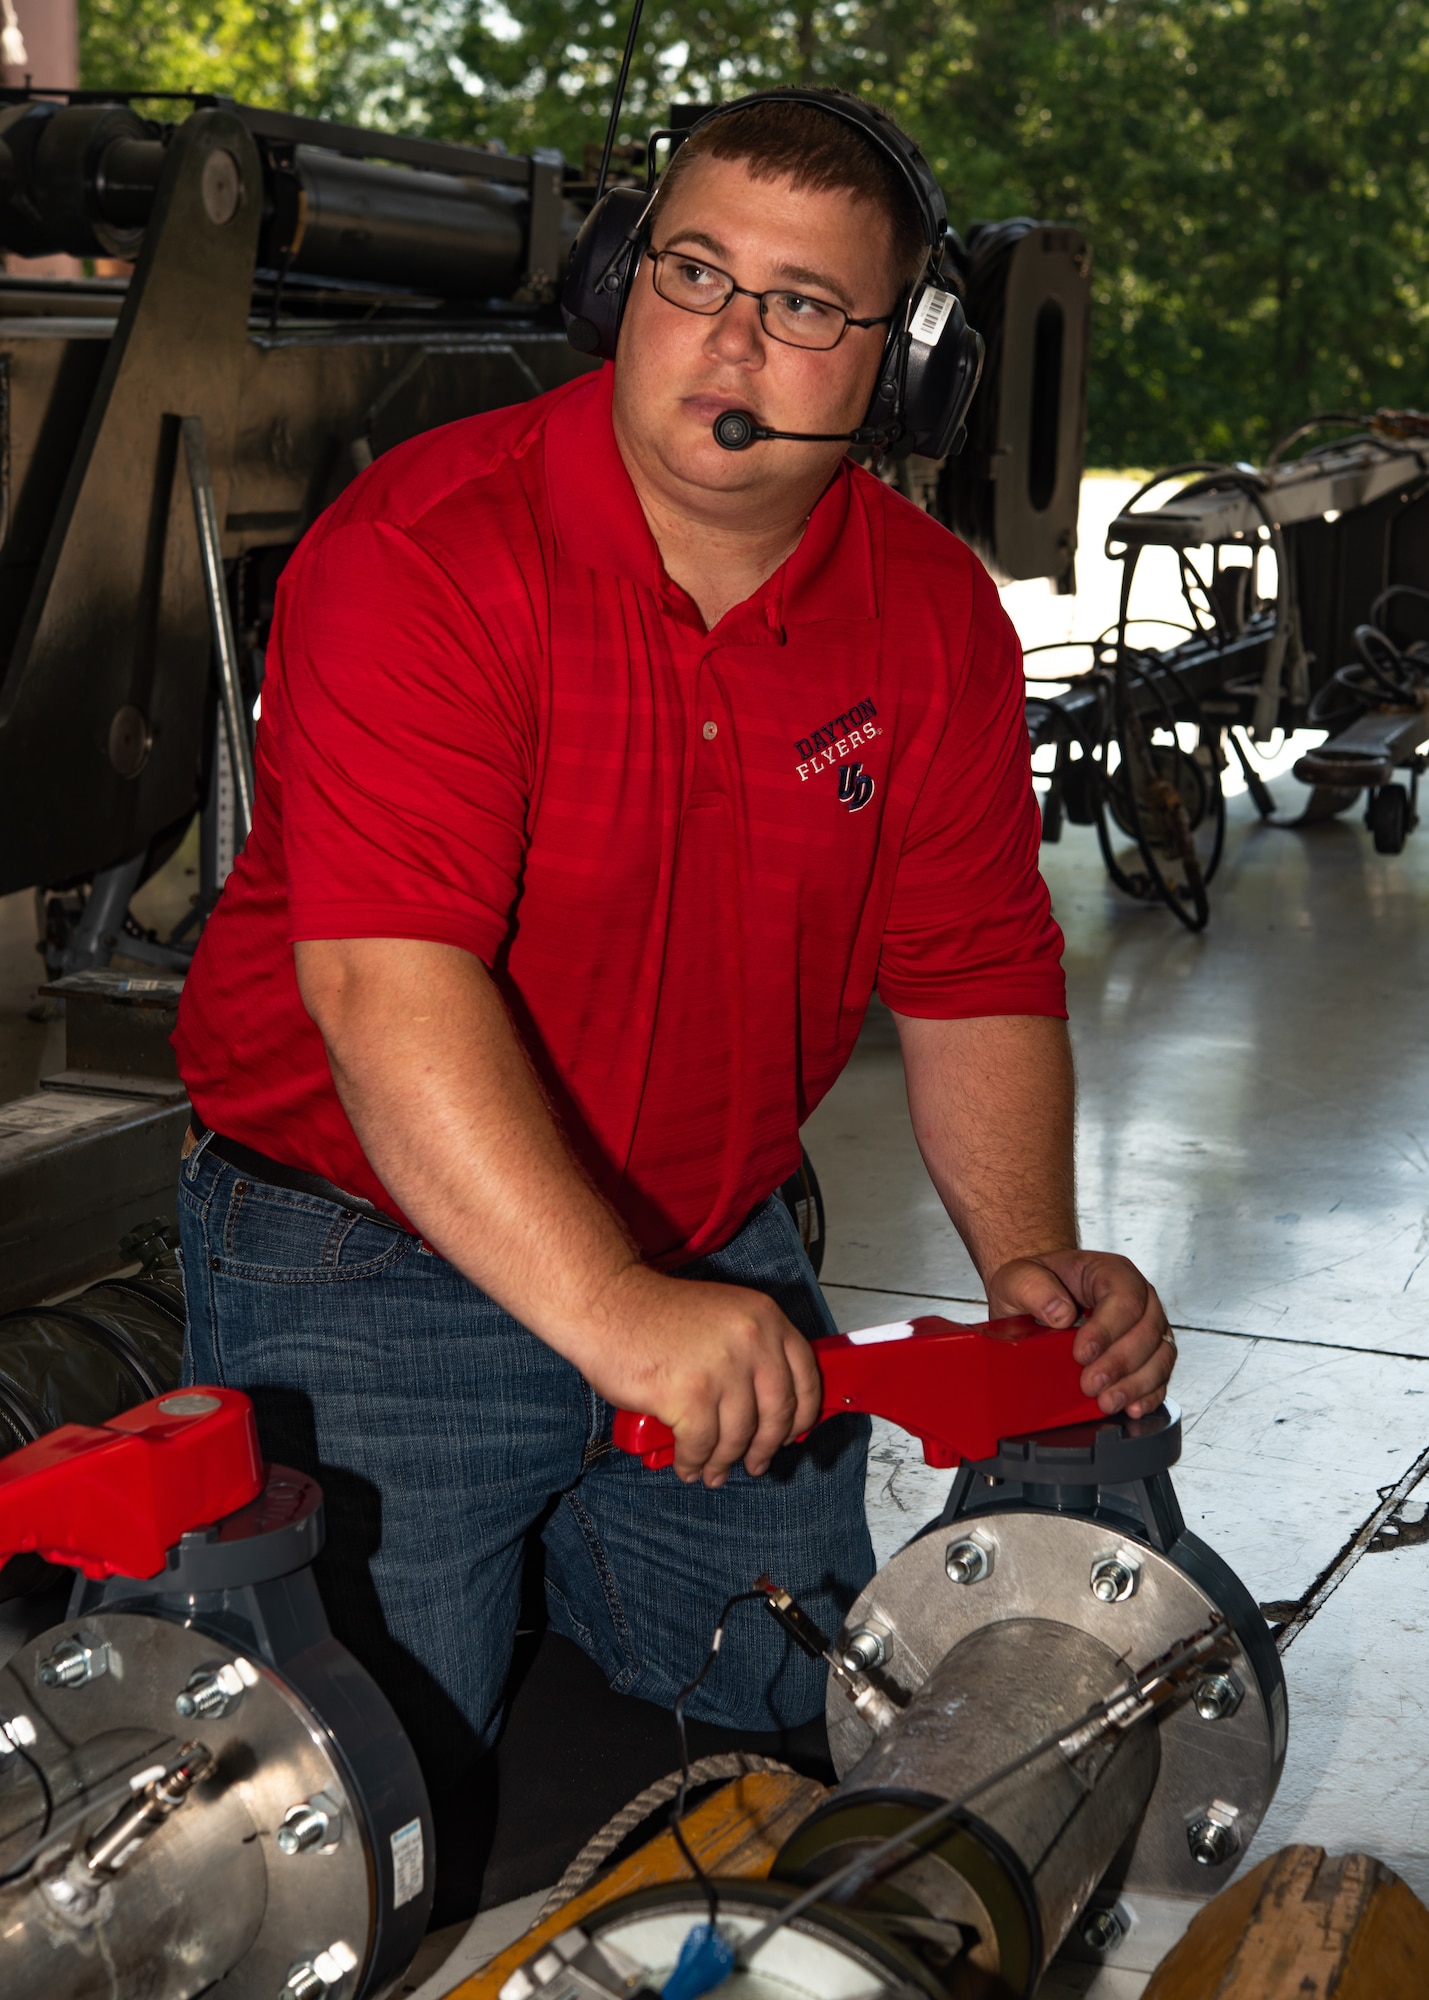 Alan Wendel, chief research technician, University of Dayton Research Institute, closes an air valve in order to create back pressure while testing a potential HVAC system for the B-2, on July 18, 2019, at Whiteman Air Force Base, Missouri. Whiteman AFB hosted seven organizations that include aircraft and equipment program offices, the Air Force Material Command, and the Air Force Research Lab to evaluate aircraft cooling options. (U.S. Air Force photo by Senior Airman Thomas Barley)